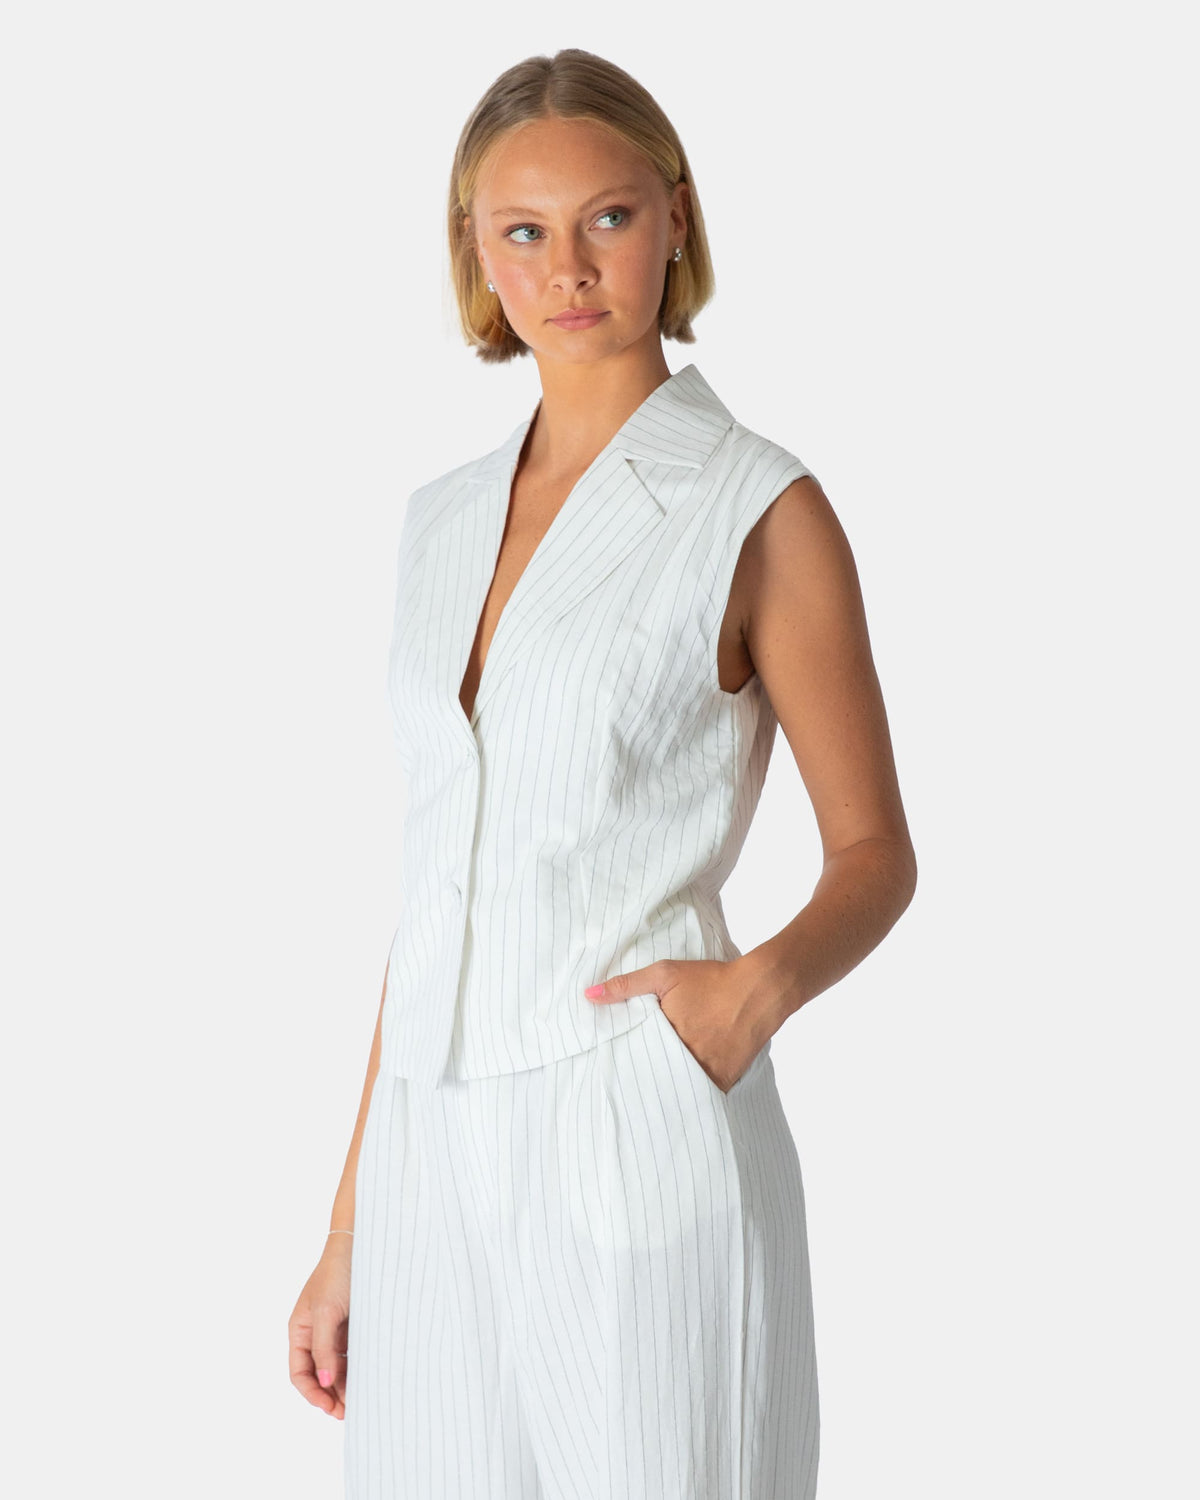 PINSTRIPE TAILORED CO-ORD COLLARED VEST